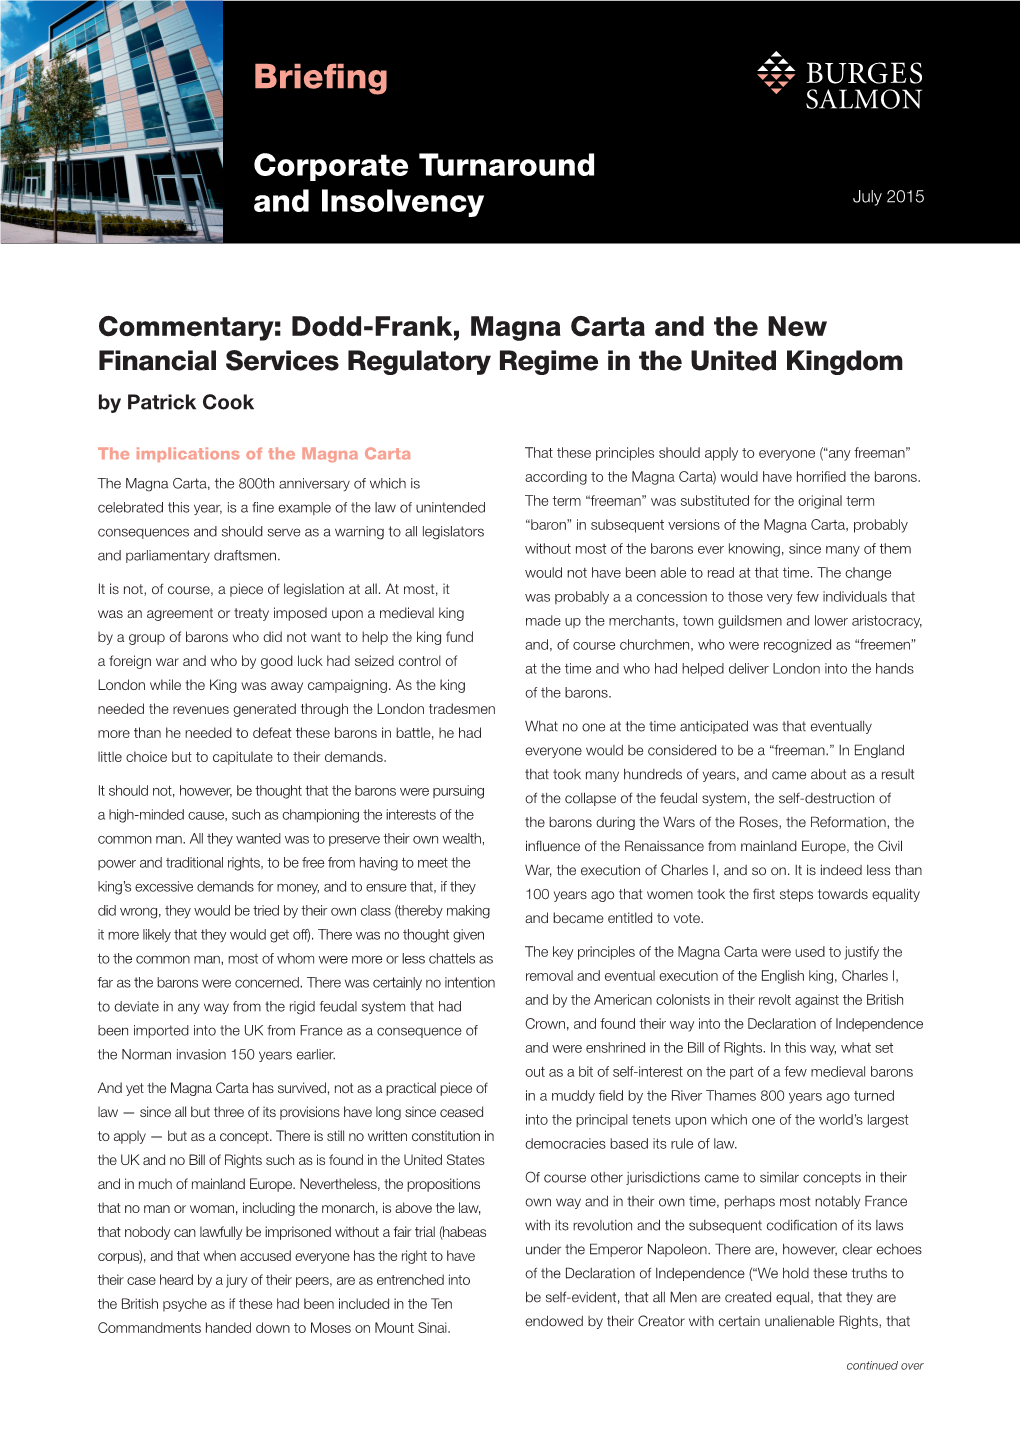 Dodd-Frank, Magna Carta and the New Financial Services Regulatory Regime in the United Kingdom by Patrick Cook